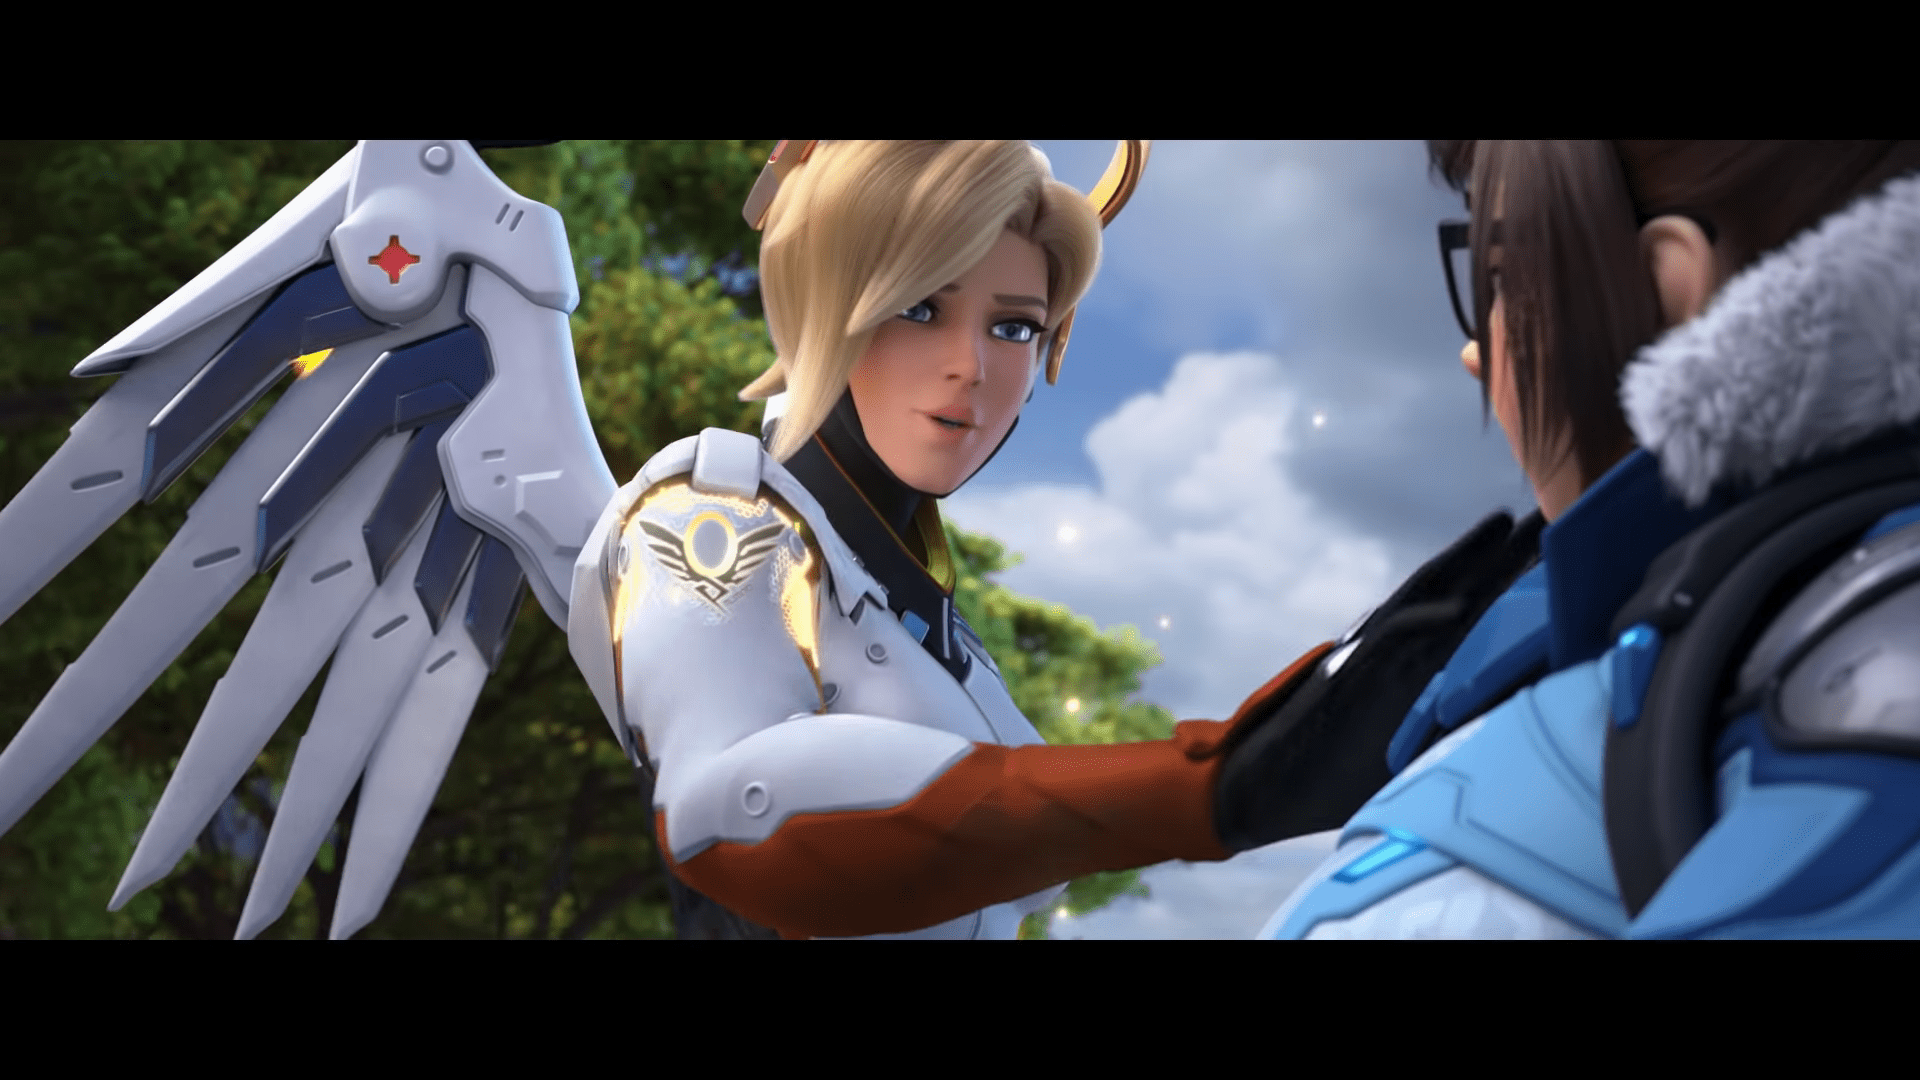 Valkyrie: Newest Overwatch Short Story Featuring Mercy, Possible New Skin